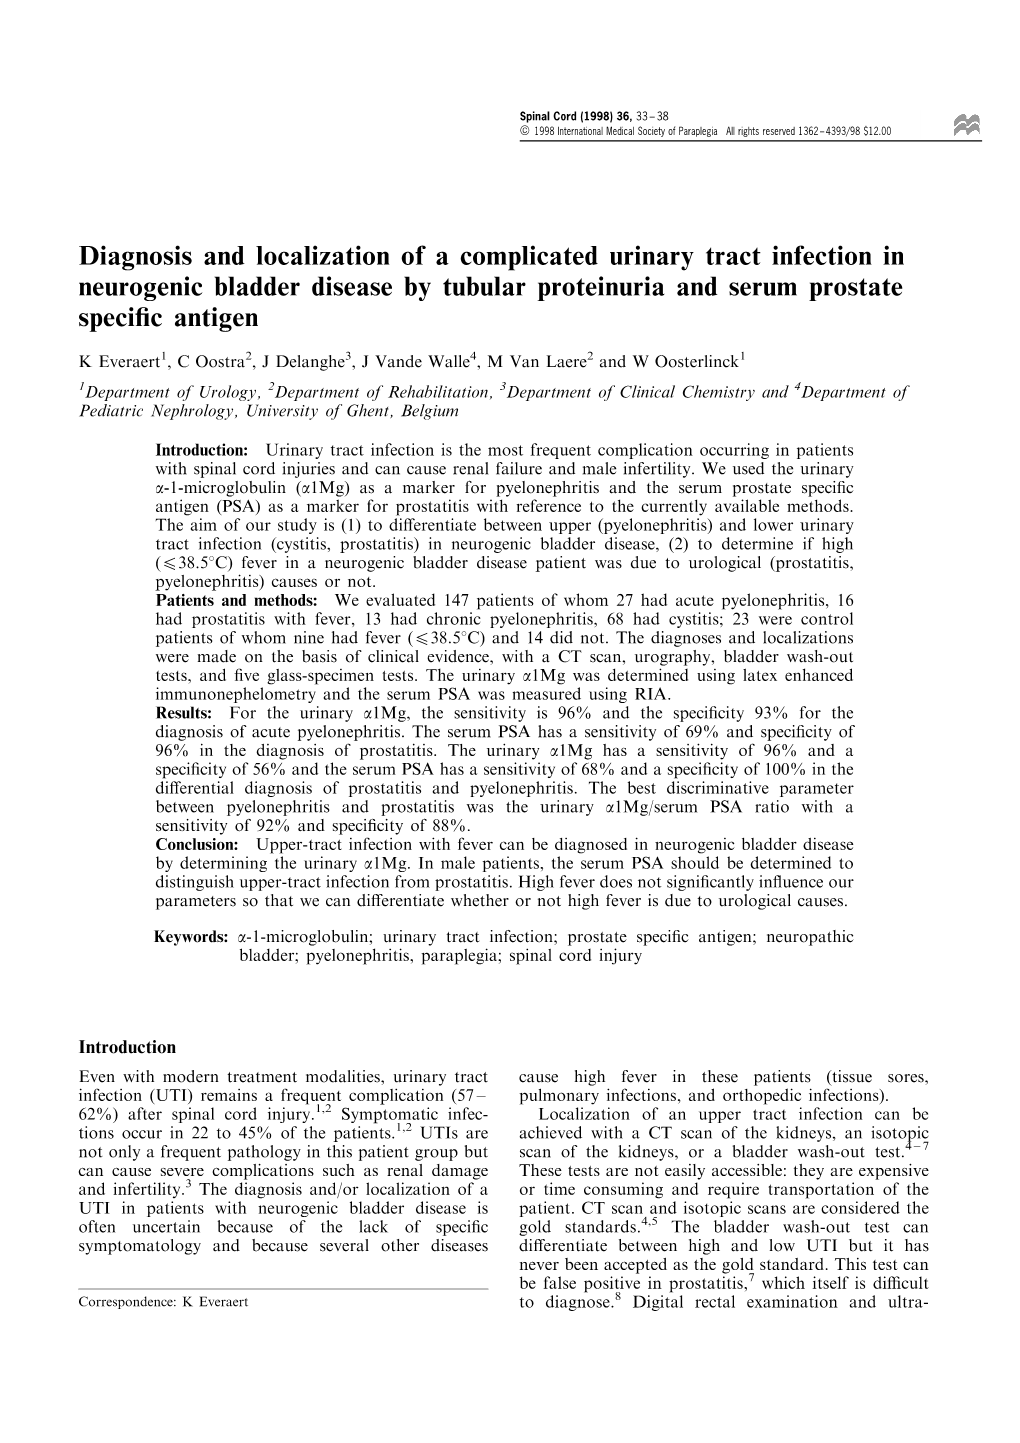 Diagnosis and Localization of a Complicated Urinary Tract Infection in Neurogenic Bladder Disease by Tubular Proteinuria and Serum Prostate Speci®C Antigen